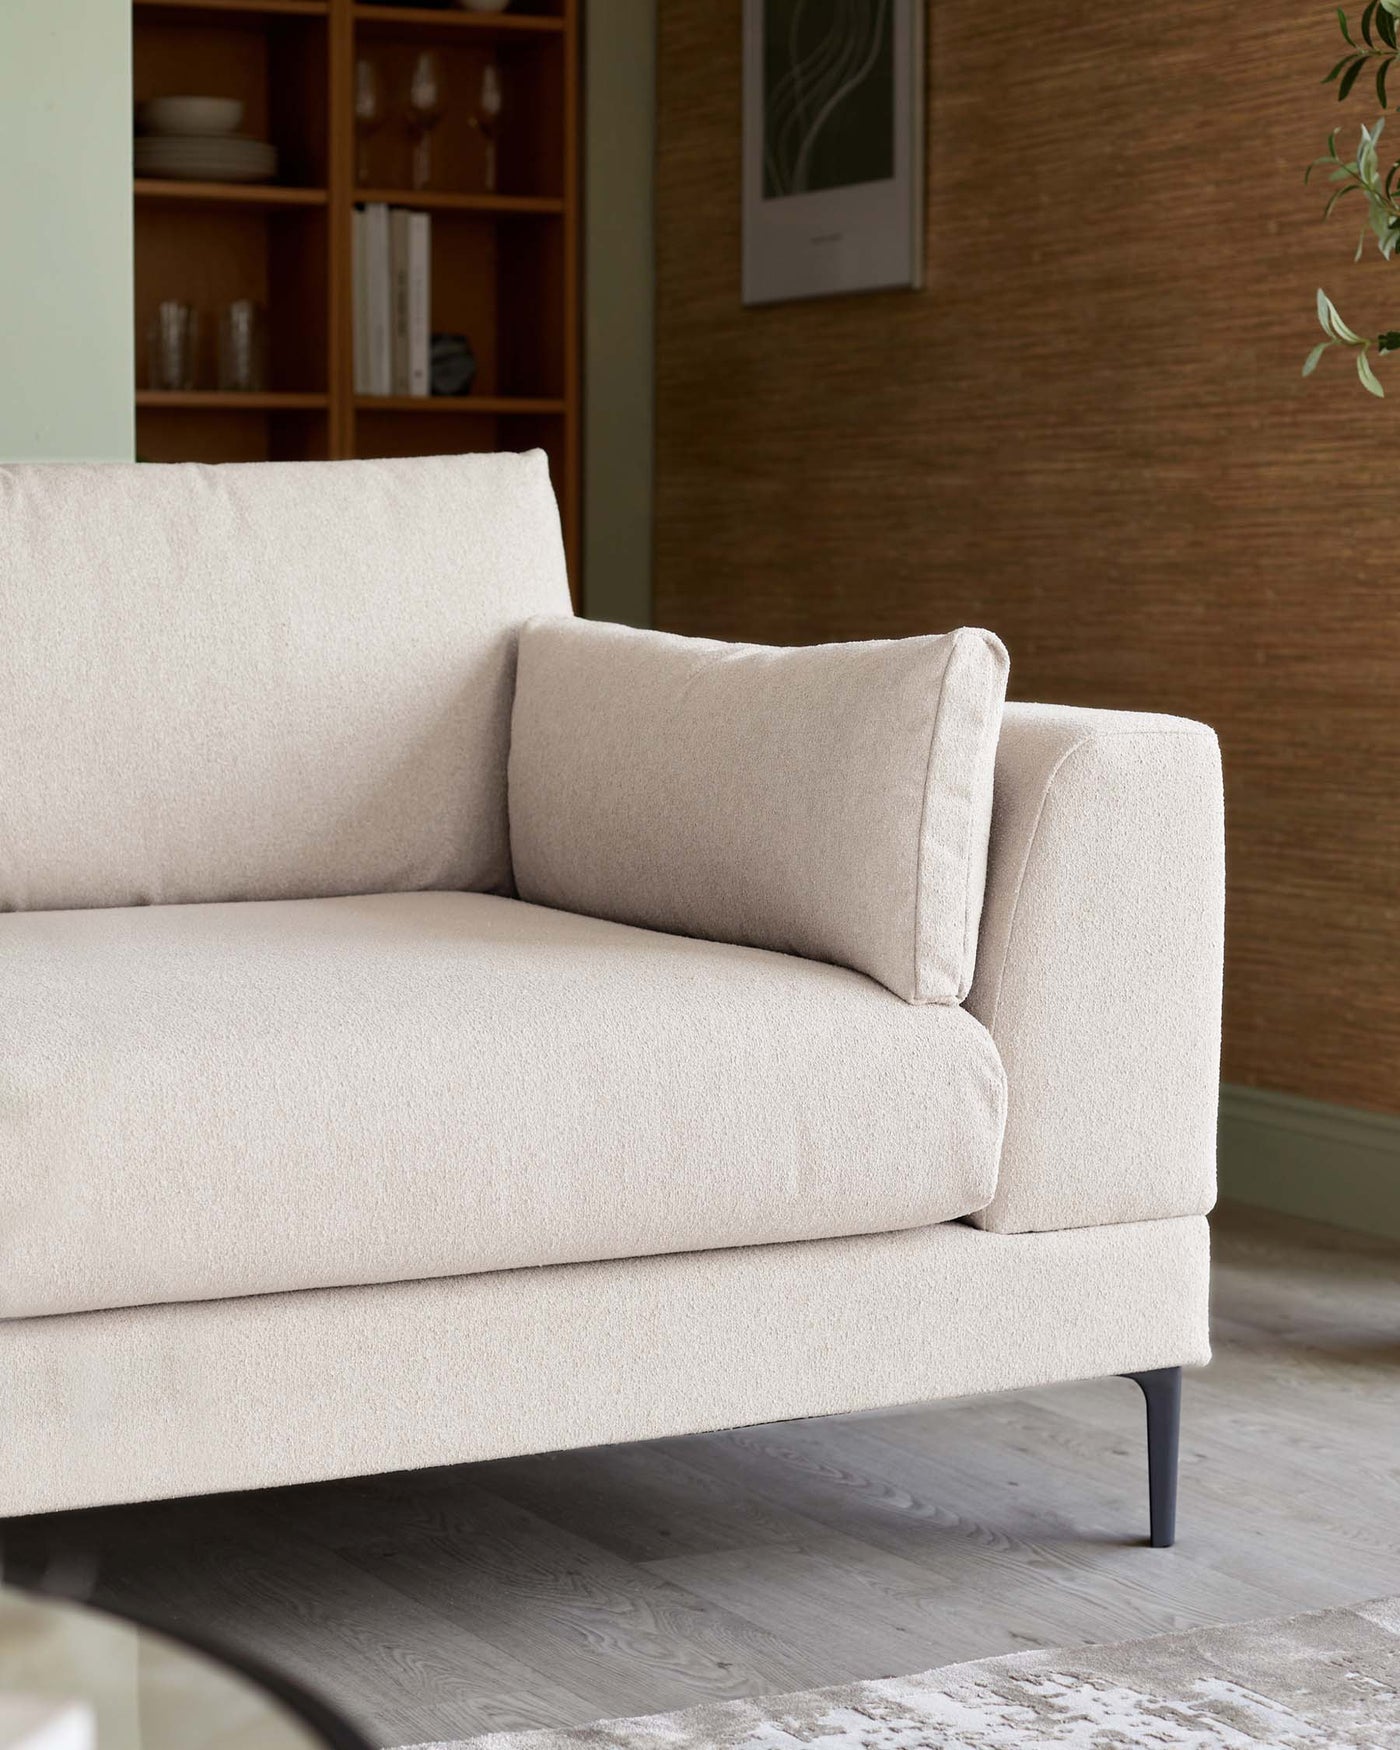 A contemporary beige upholstered sofa with clean lines and a minimalist design. Features plush cushioning, a single bench-style seat cushion, and a structured backrest with an additional loose pillow for comfort. Rests on slim, black metal legs complementing its modern aesthetic. Background includes a wood cabinet with glassware and books, set against a textured wall with framed artwork, enhancing the sophisticated ambiance.